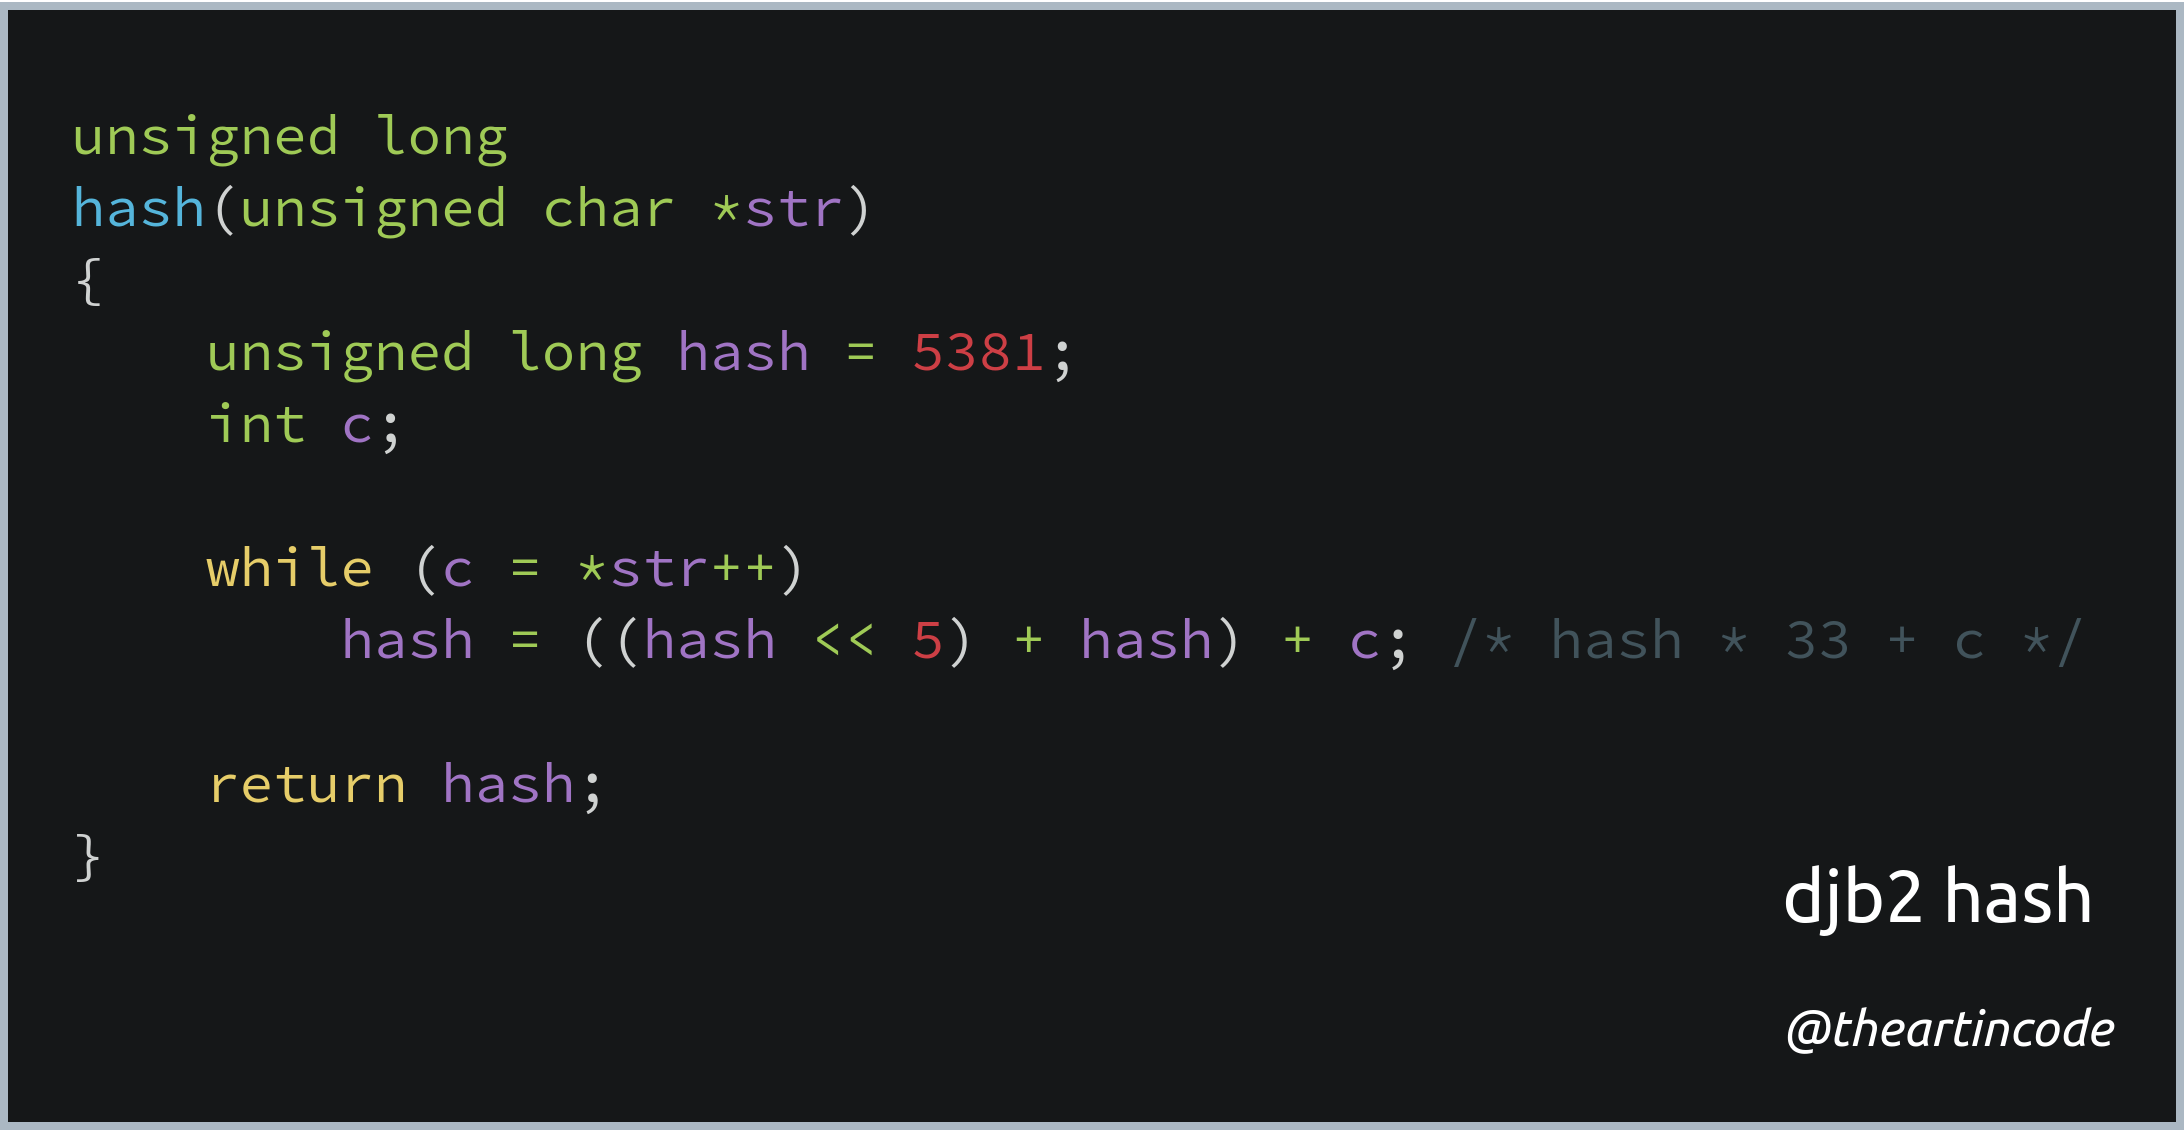 Code snippet of the djb2 hash